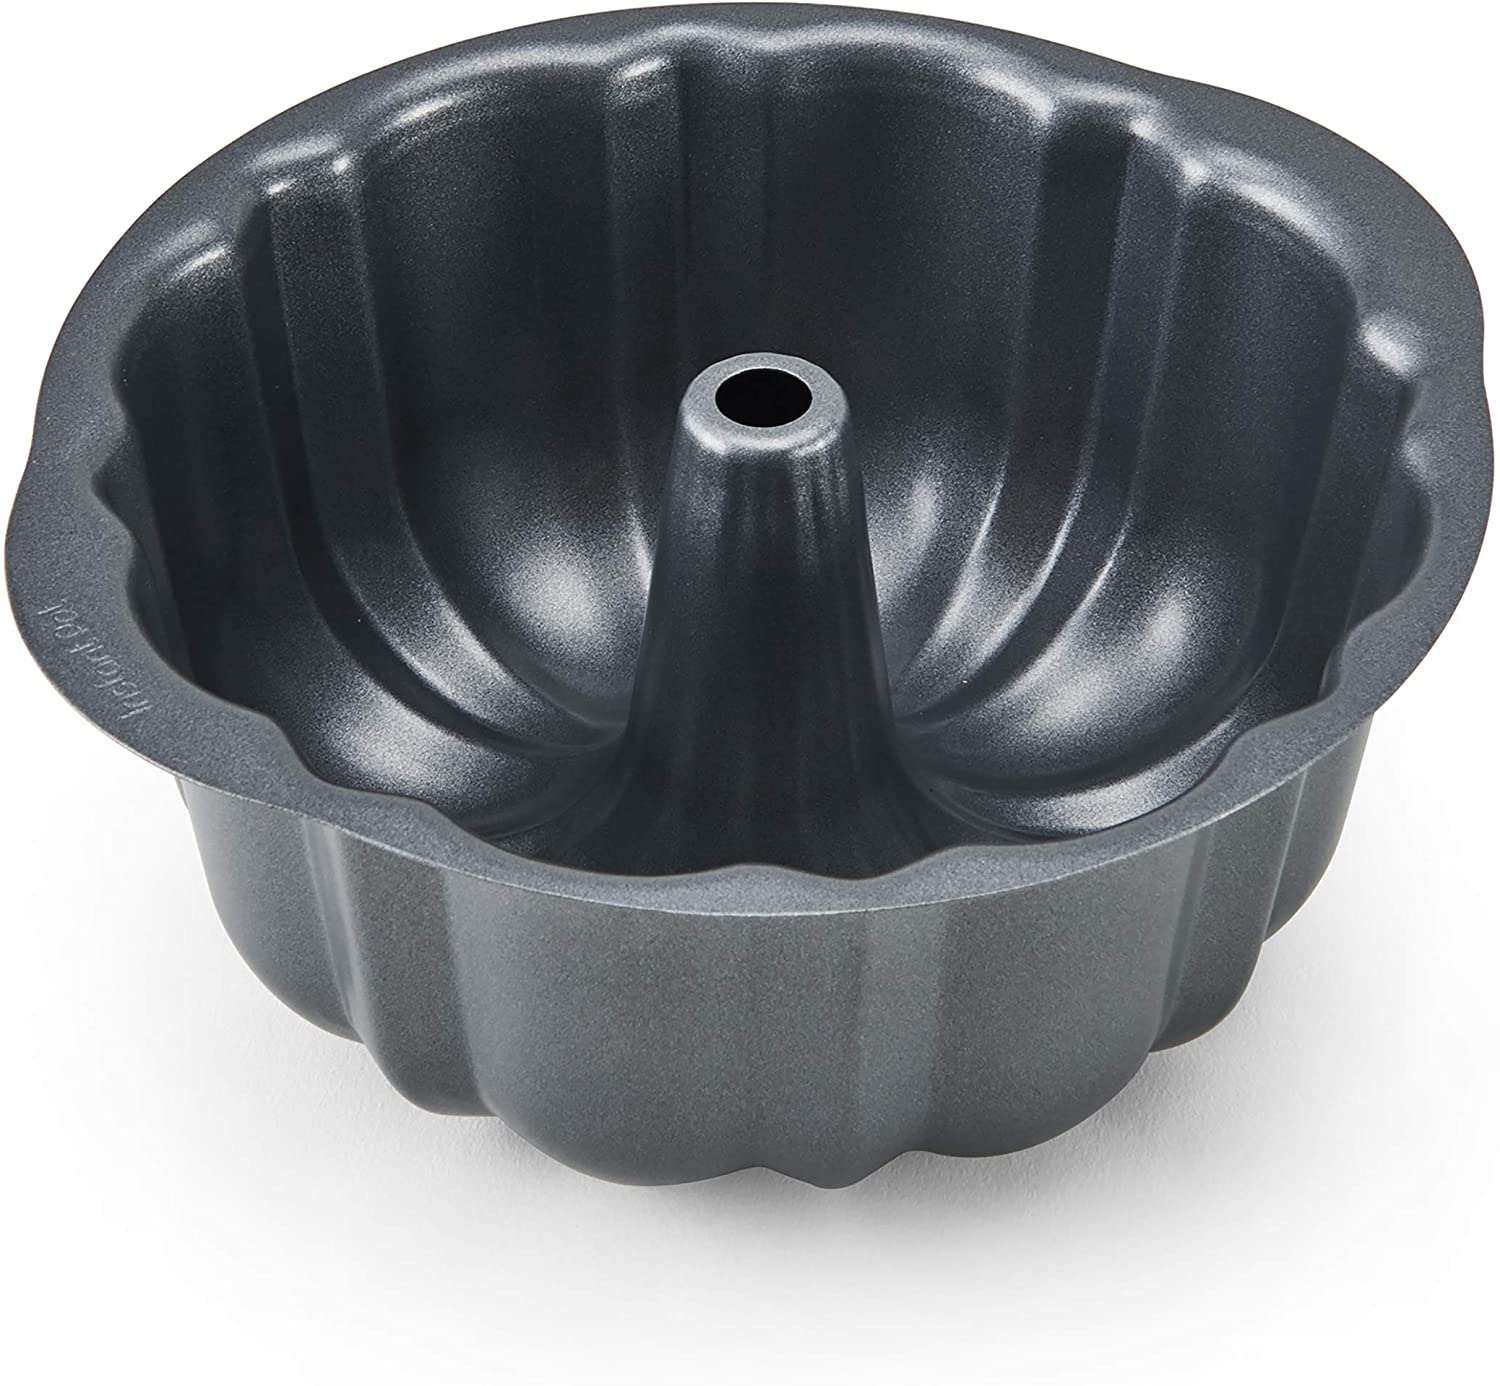 https://www.dontwasteyourmoney.com/wp-content/uploads/2020/07/instant-pot-official-fluted-cake-tube-pan-7-inch-tube-pan.jpg